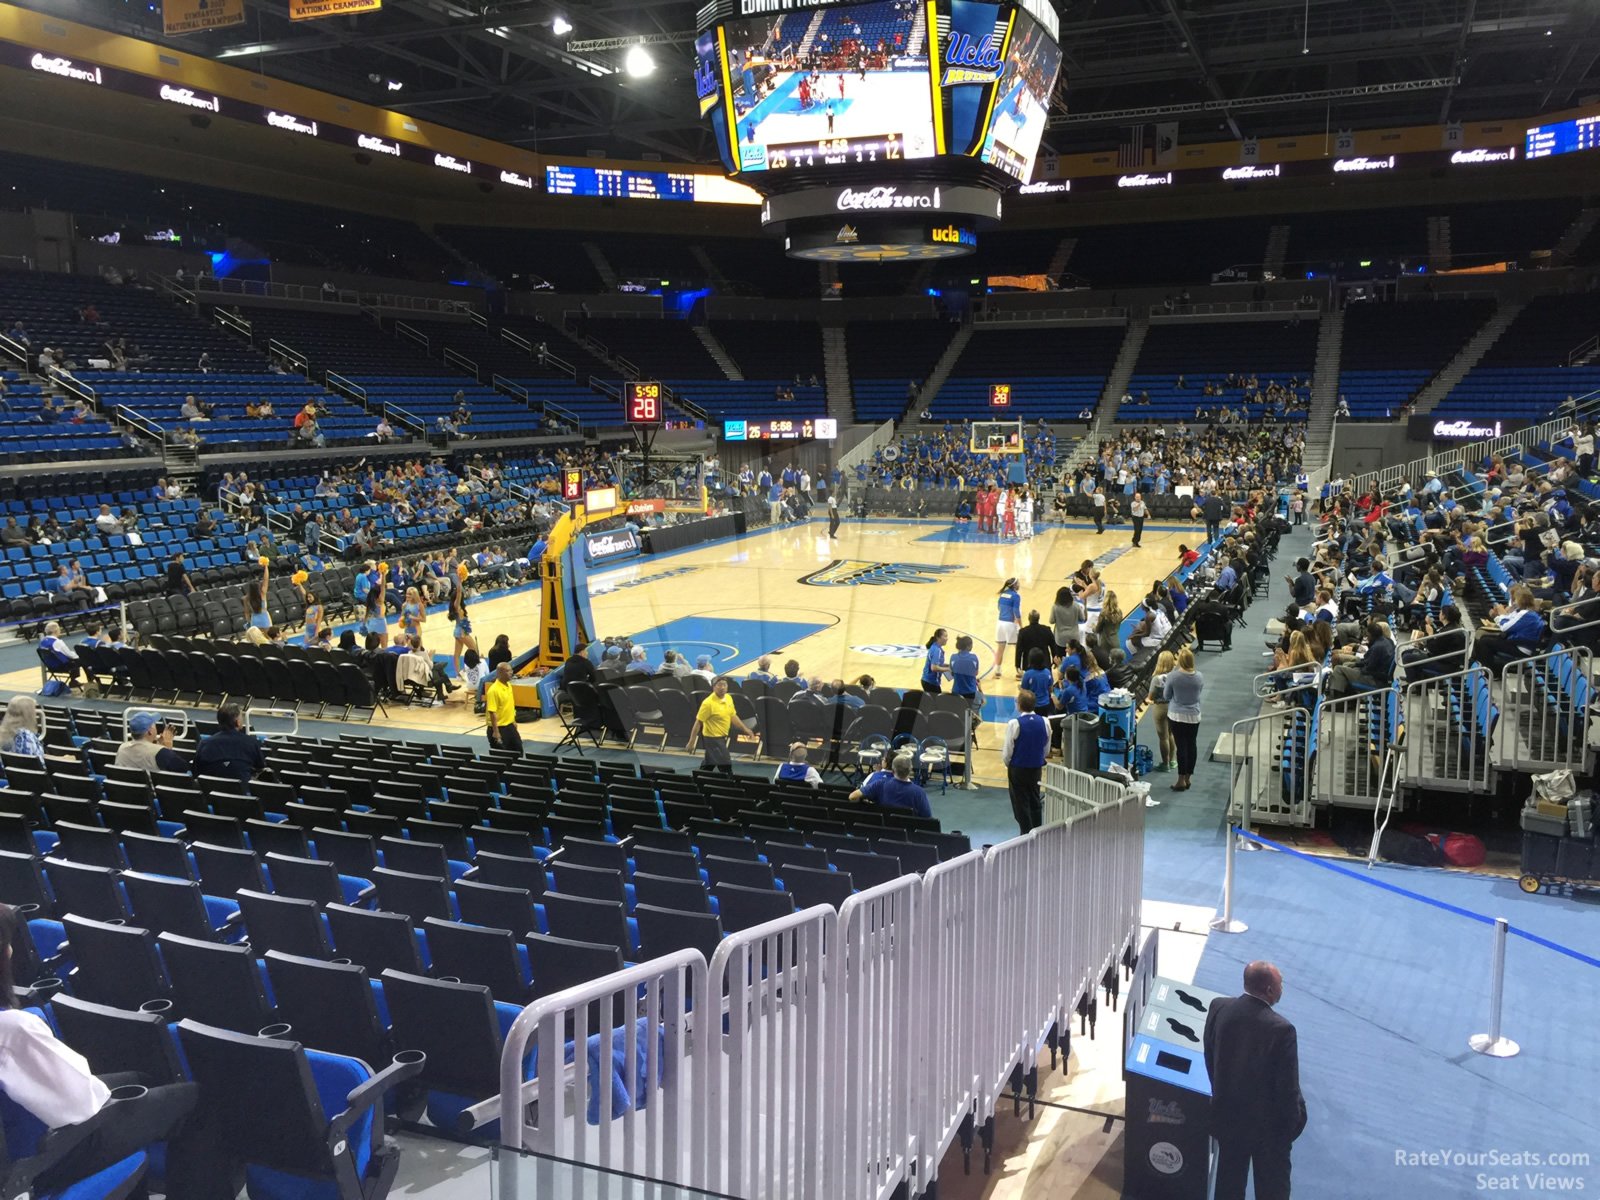 section 107, row 3 seat view  - pauley pavilion